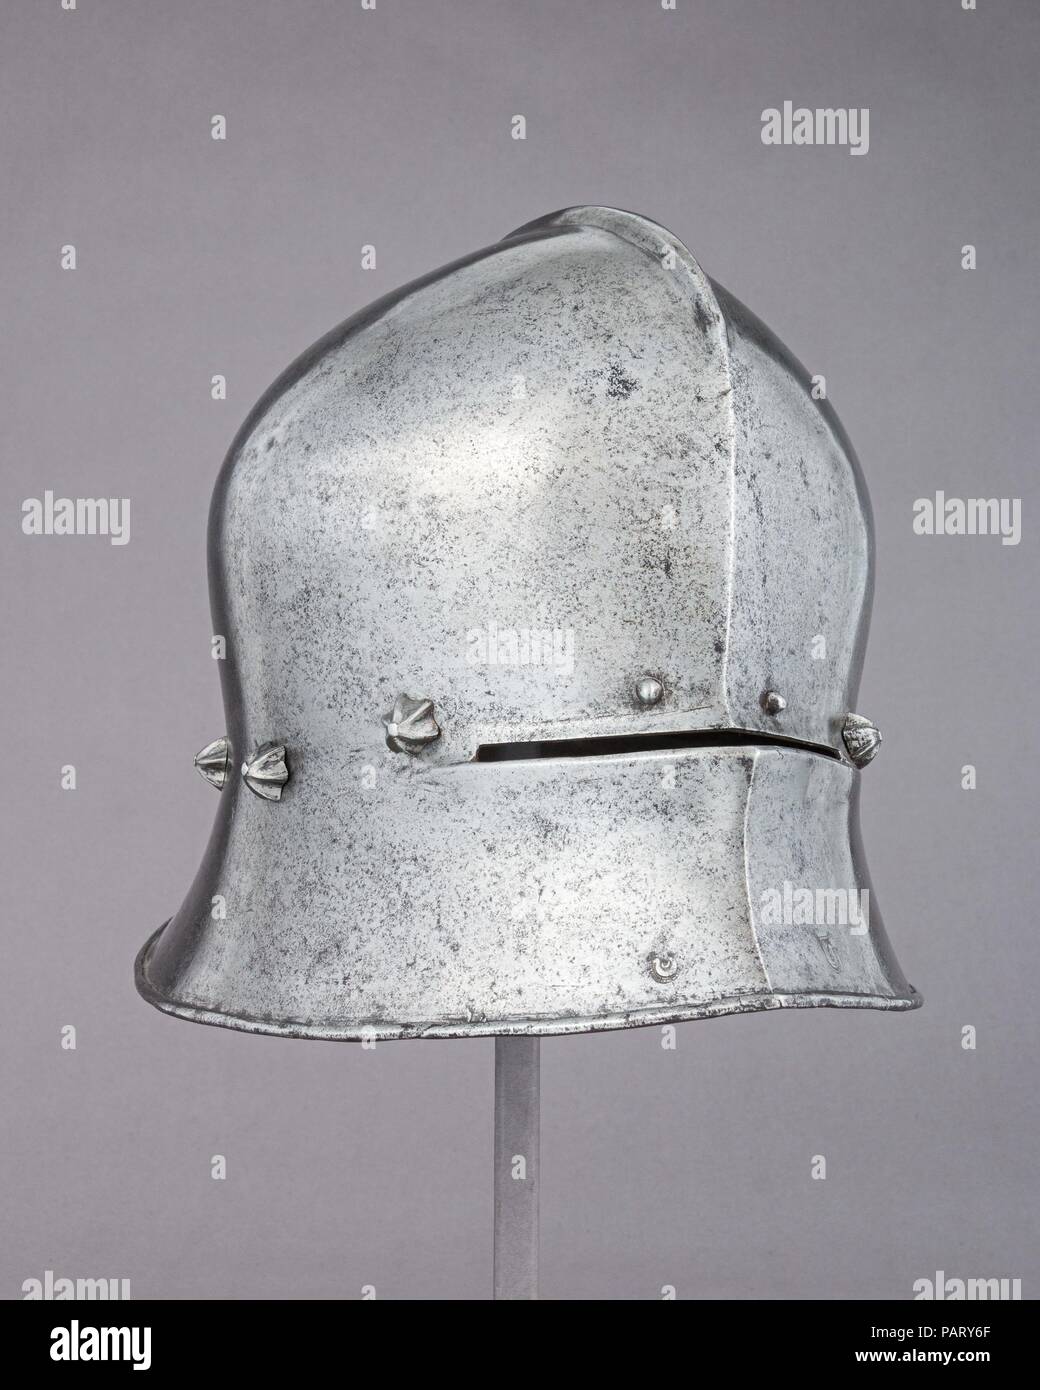 Sallet. Armorer: Attributed to Adrian Treytz the Elder (Austrian, Innsbruck, active ca. 1473-92). Culture: Austrian, Innsbruck. Dimensions: H. 9 3/4 in. (24.8 cm); W. 11 1/2 in. (29.2 cm); D. 14 5/8 in. (37.1 cm); Wt. 6 lb. 2 oz. (2778 g). Date: ca. 1480.  The maker's mark on this helmet, a horseshoe and a crescent, is attributed to Adrian Treytz the Elder, whose family included at least five armorers who worked for the Habsburg court in the late fifteenth and early sixteenth centuries. Museum: Metropolitan Museum of Art, New York, USA. Stock Photo